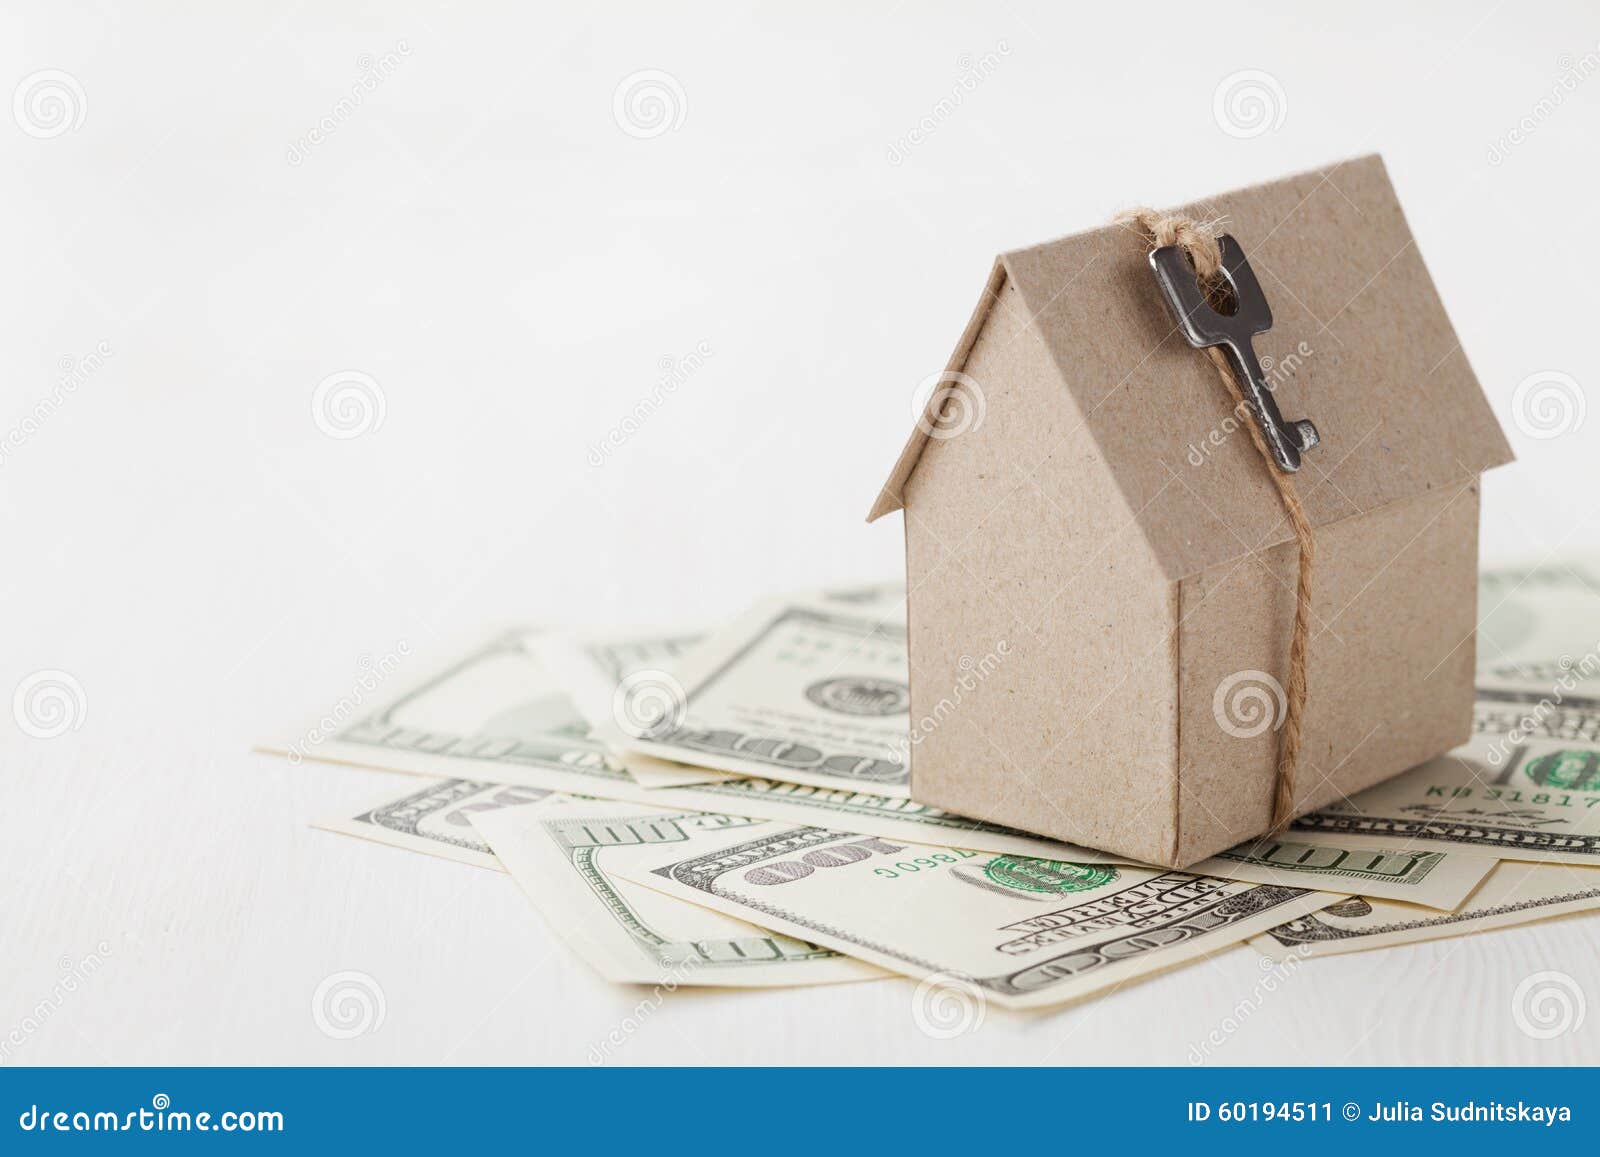 model of cardboard house with key and dollar bills. house building, loan, real estate, cost of housing or buying a new home concep